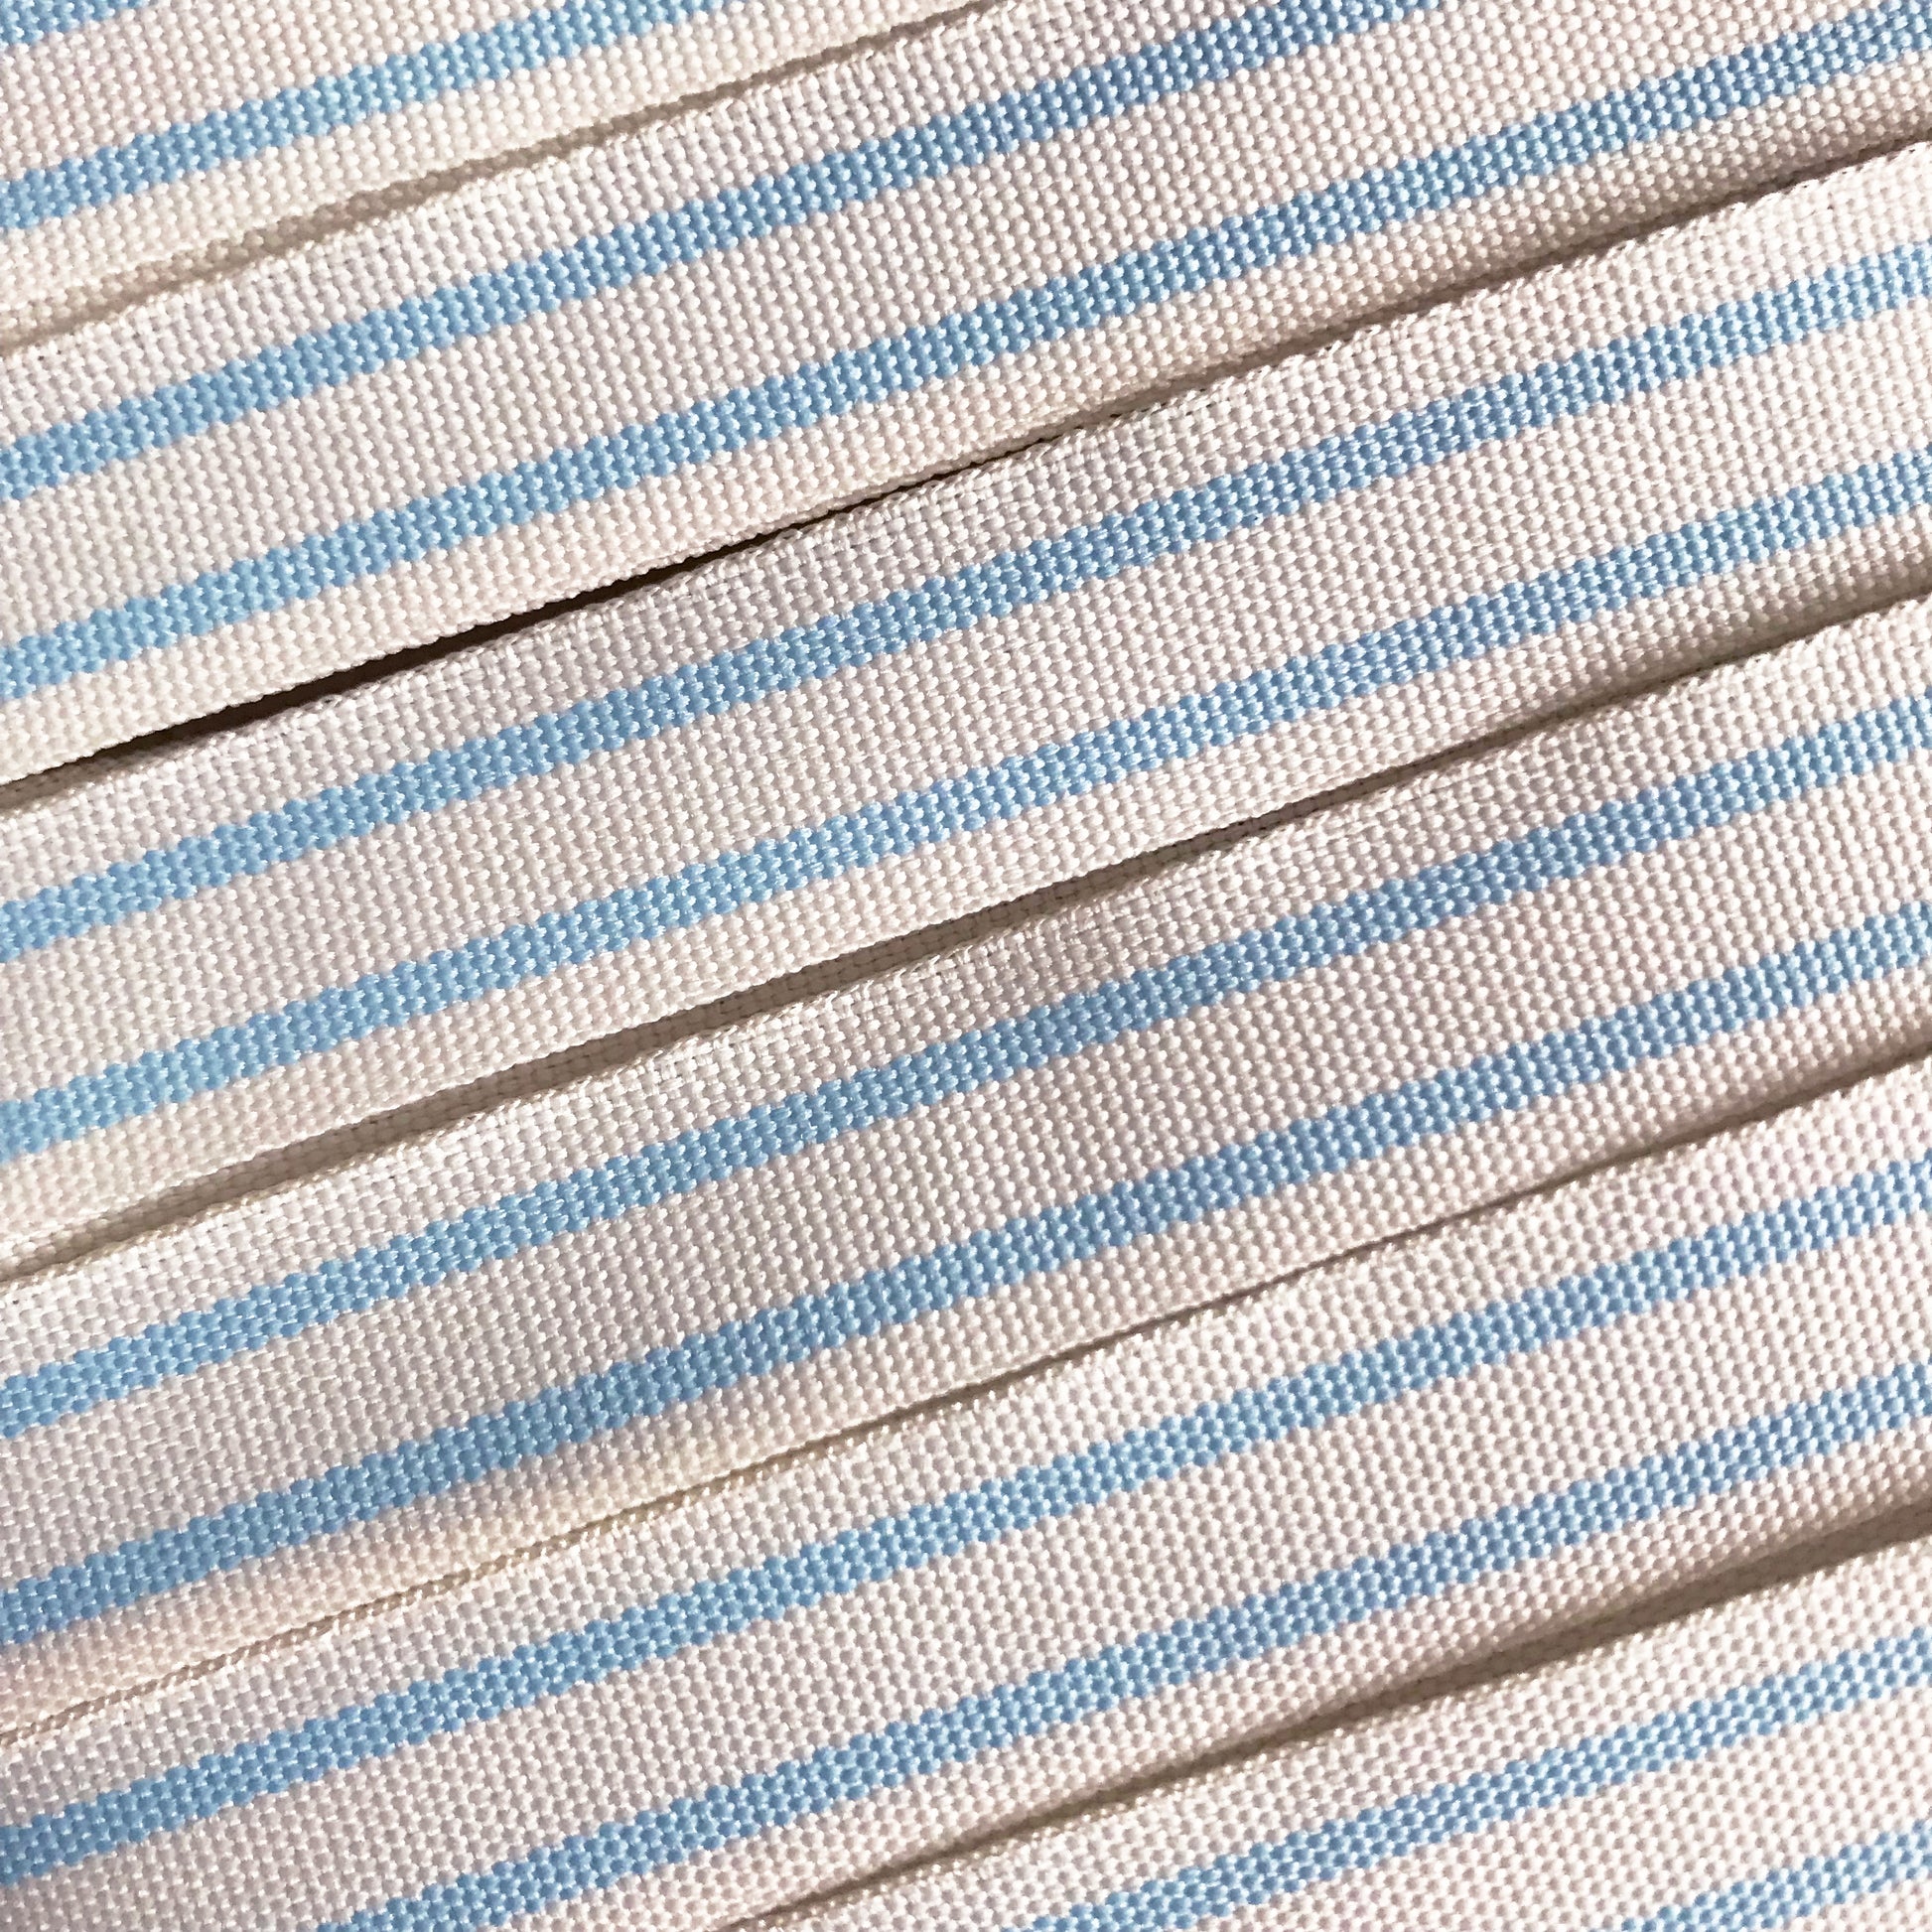 15mm Baby Blue and Cream Vintage Style Ticking Stripe Ribbon - SweetpeaStore